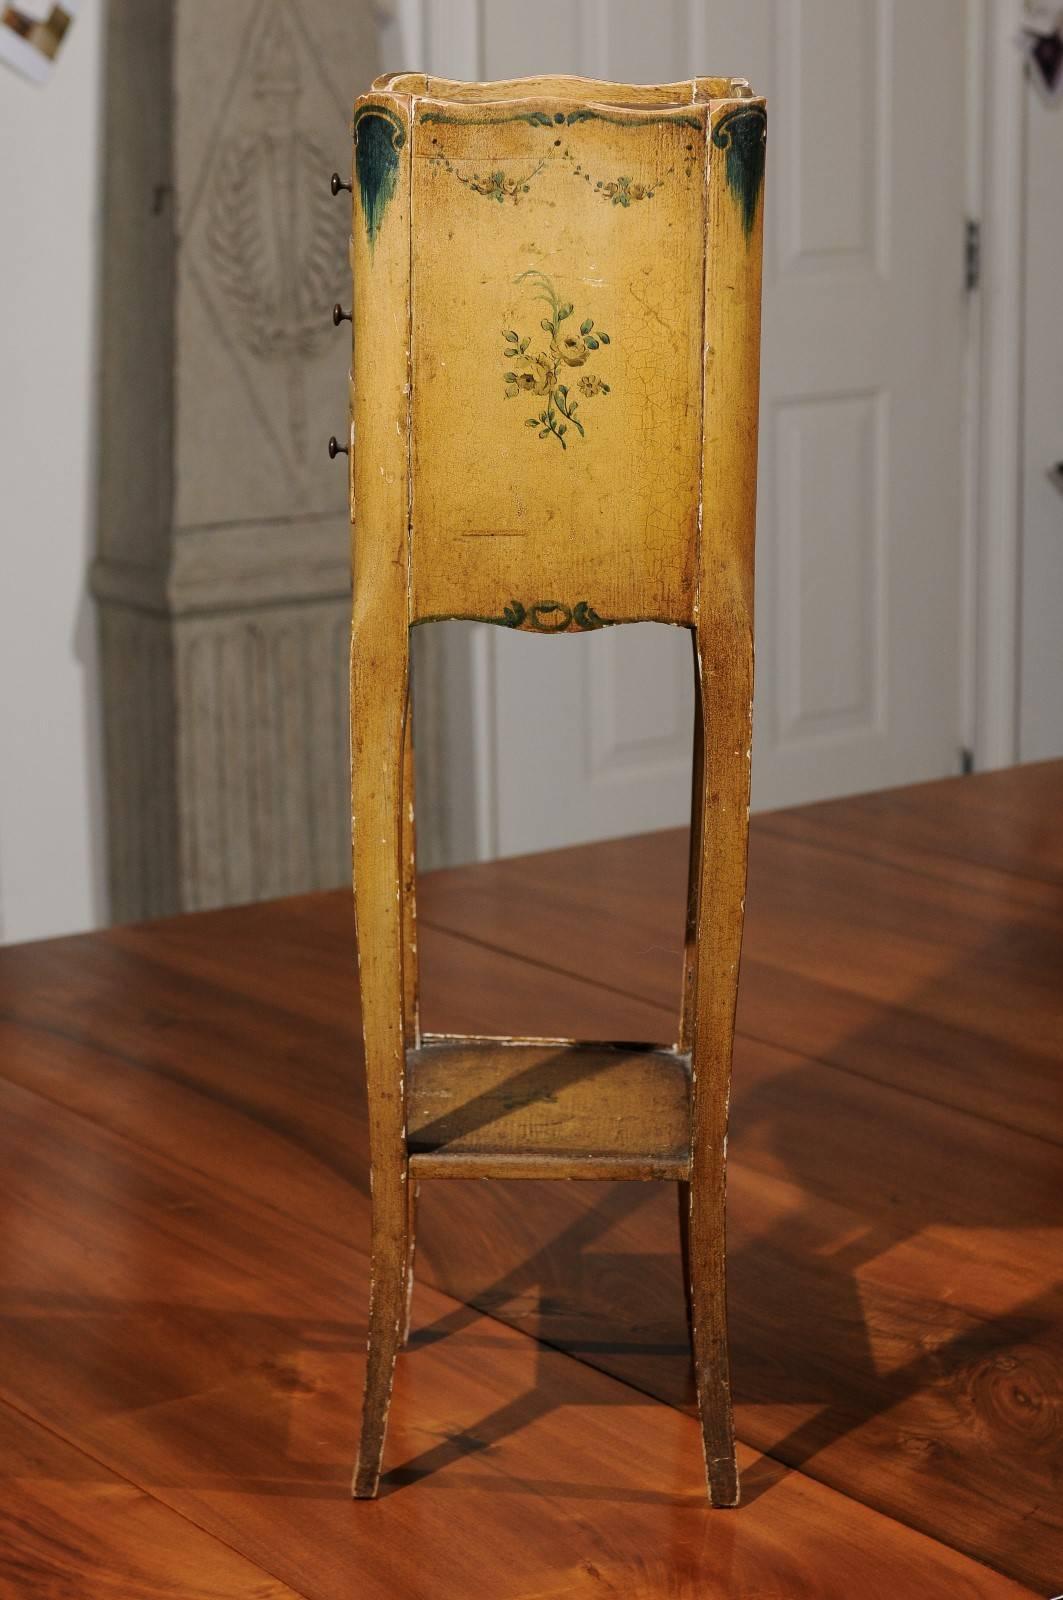 Italian 19th Century Nightstand Table with Painted Decor, Drawers and Low Shelf 3